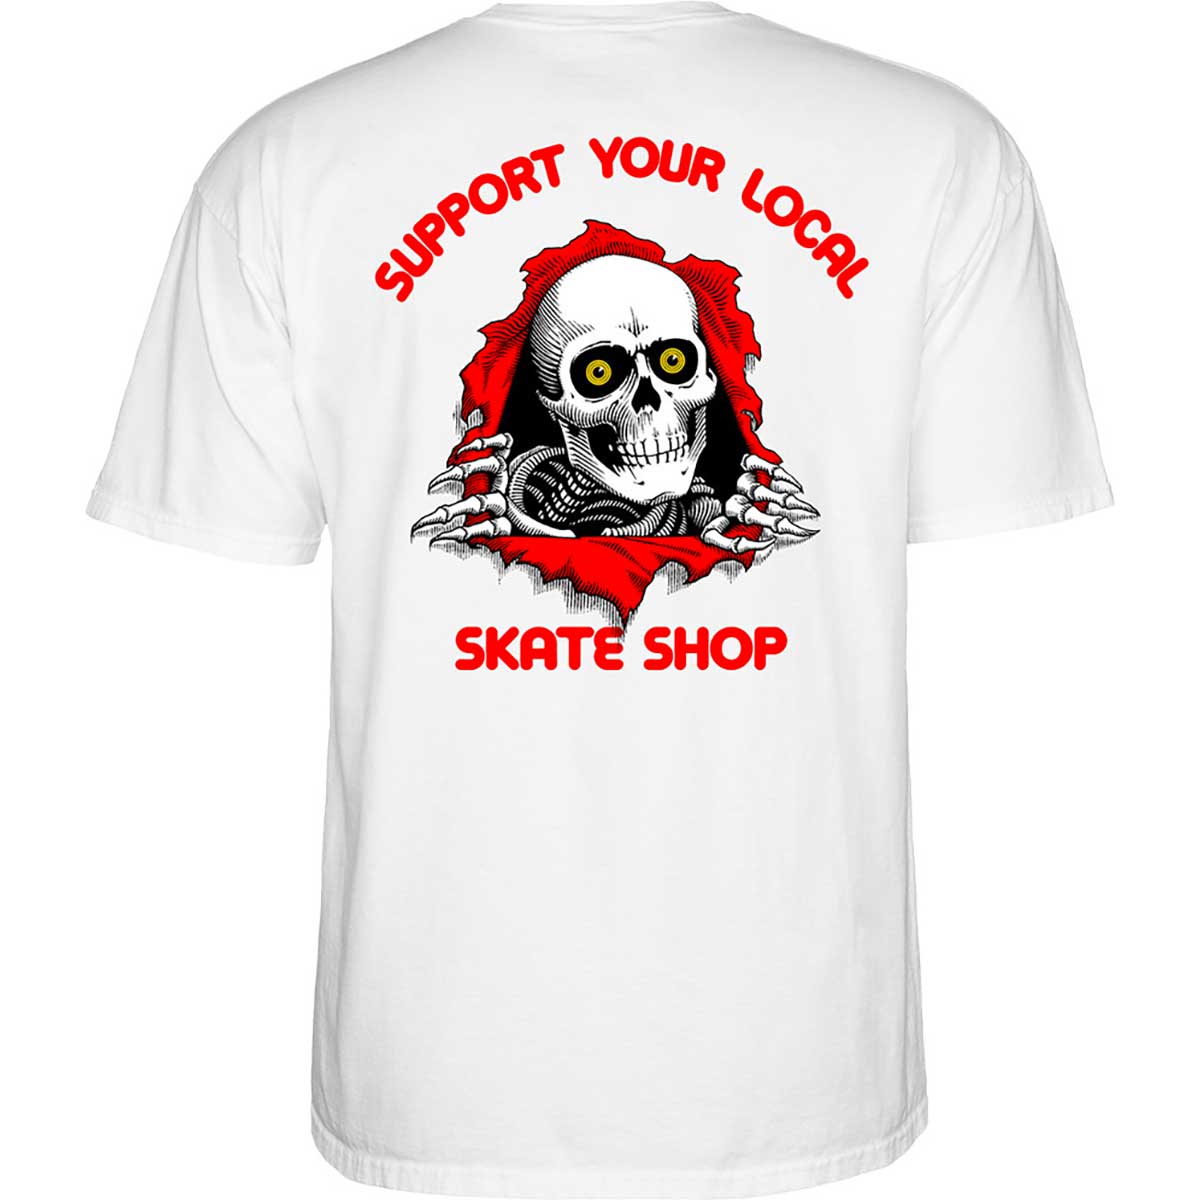 Powell Peralta Ripper Support Your Local Skateshop T-Shirt White CTMPP2SYLSSWM